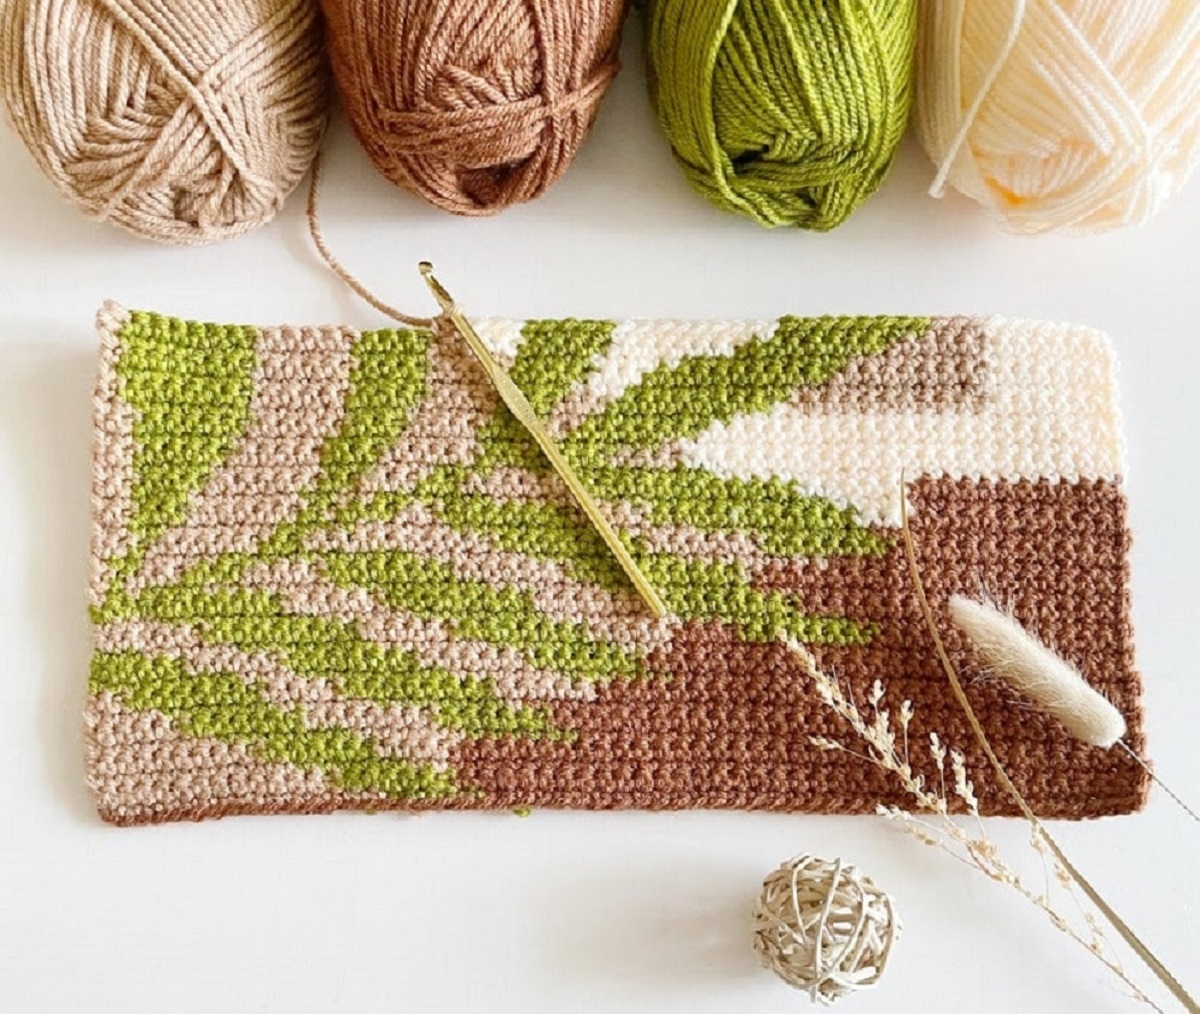 A brown crochet rectangle with a green leaf stitched on top next to balls of yarn and a crochet hook on top.